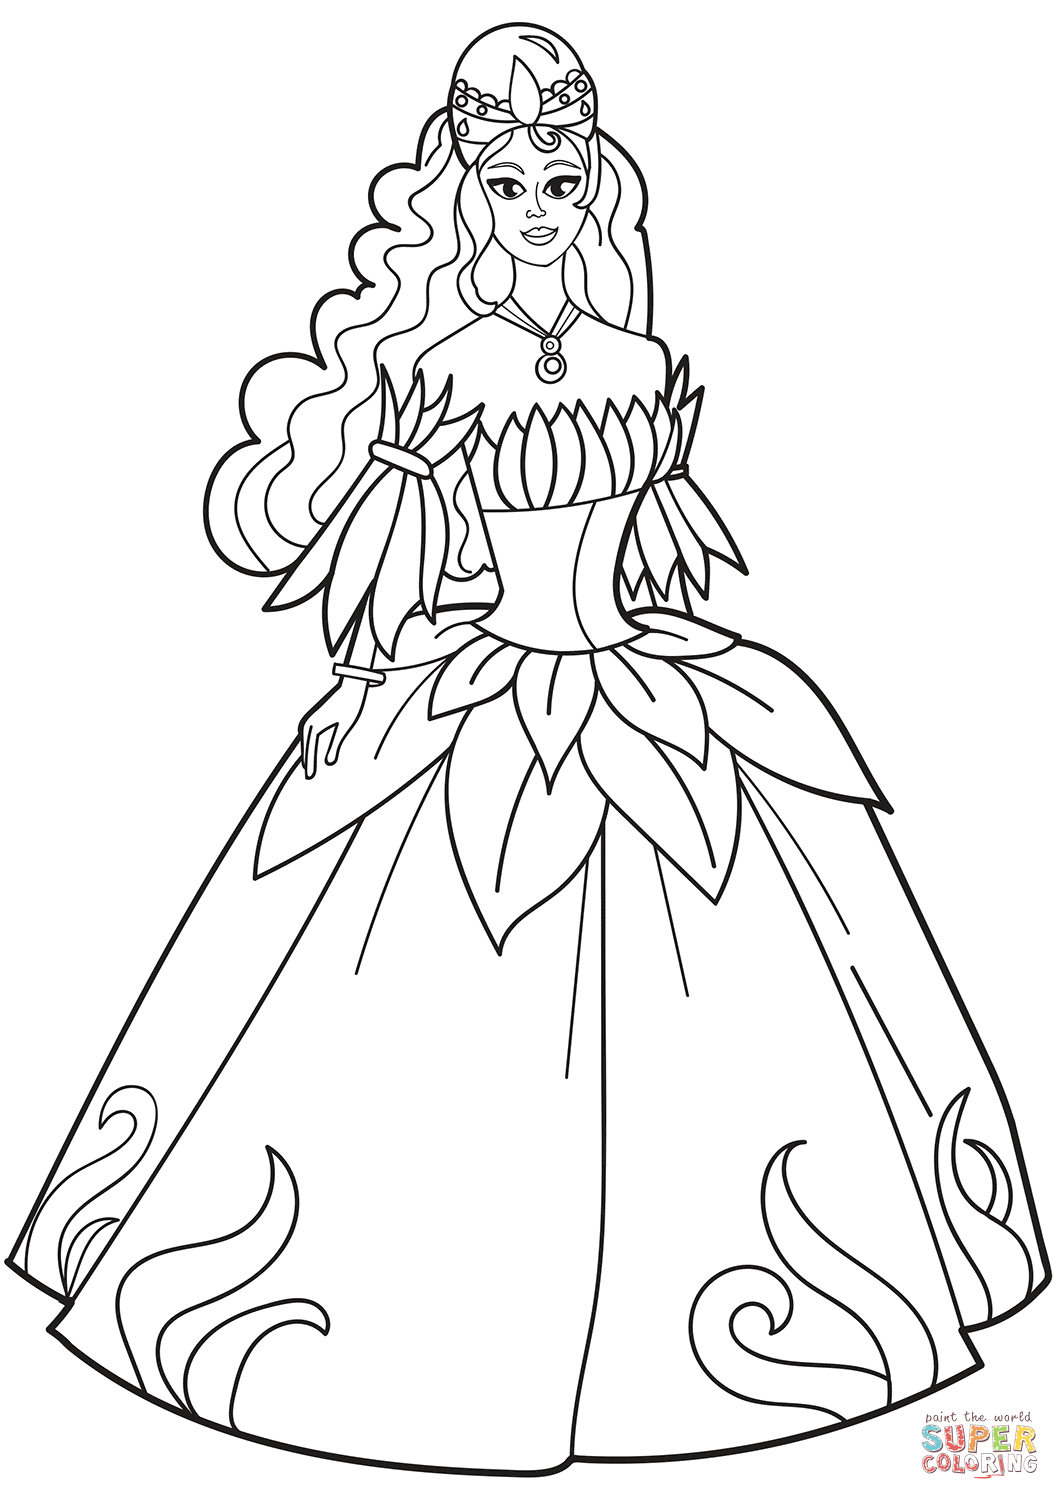 Princess In Flower Dress Coloring Page Free Printable Coloring Pages